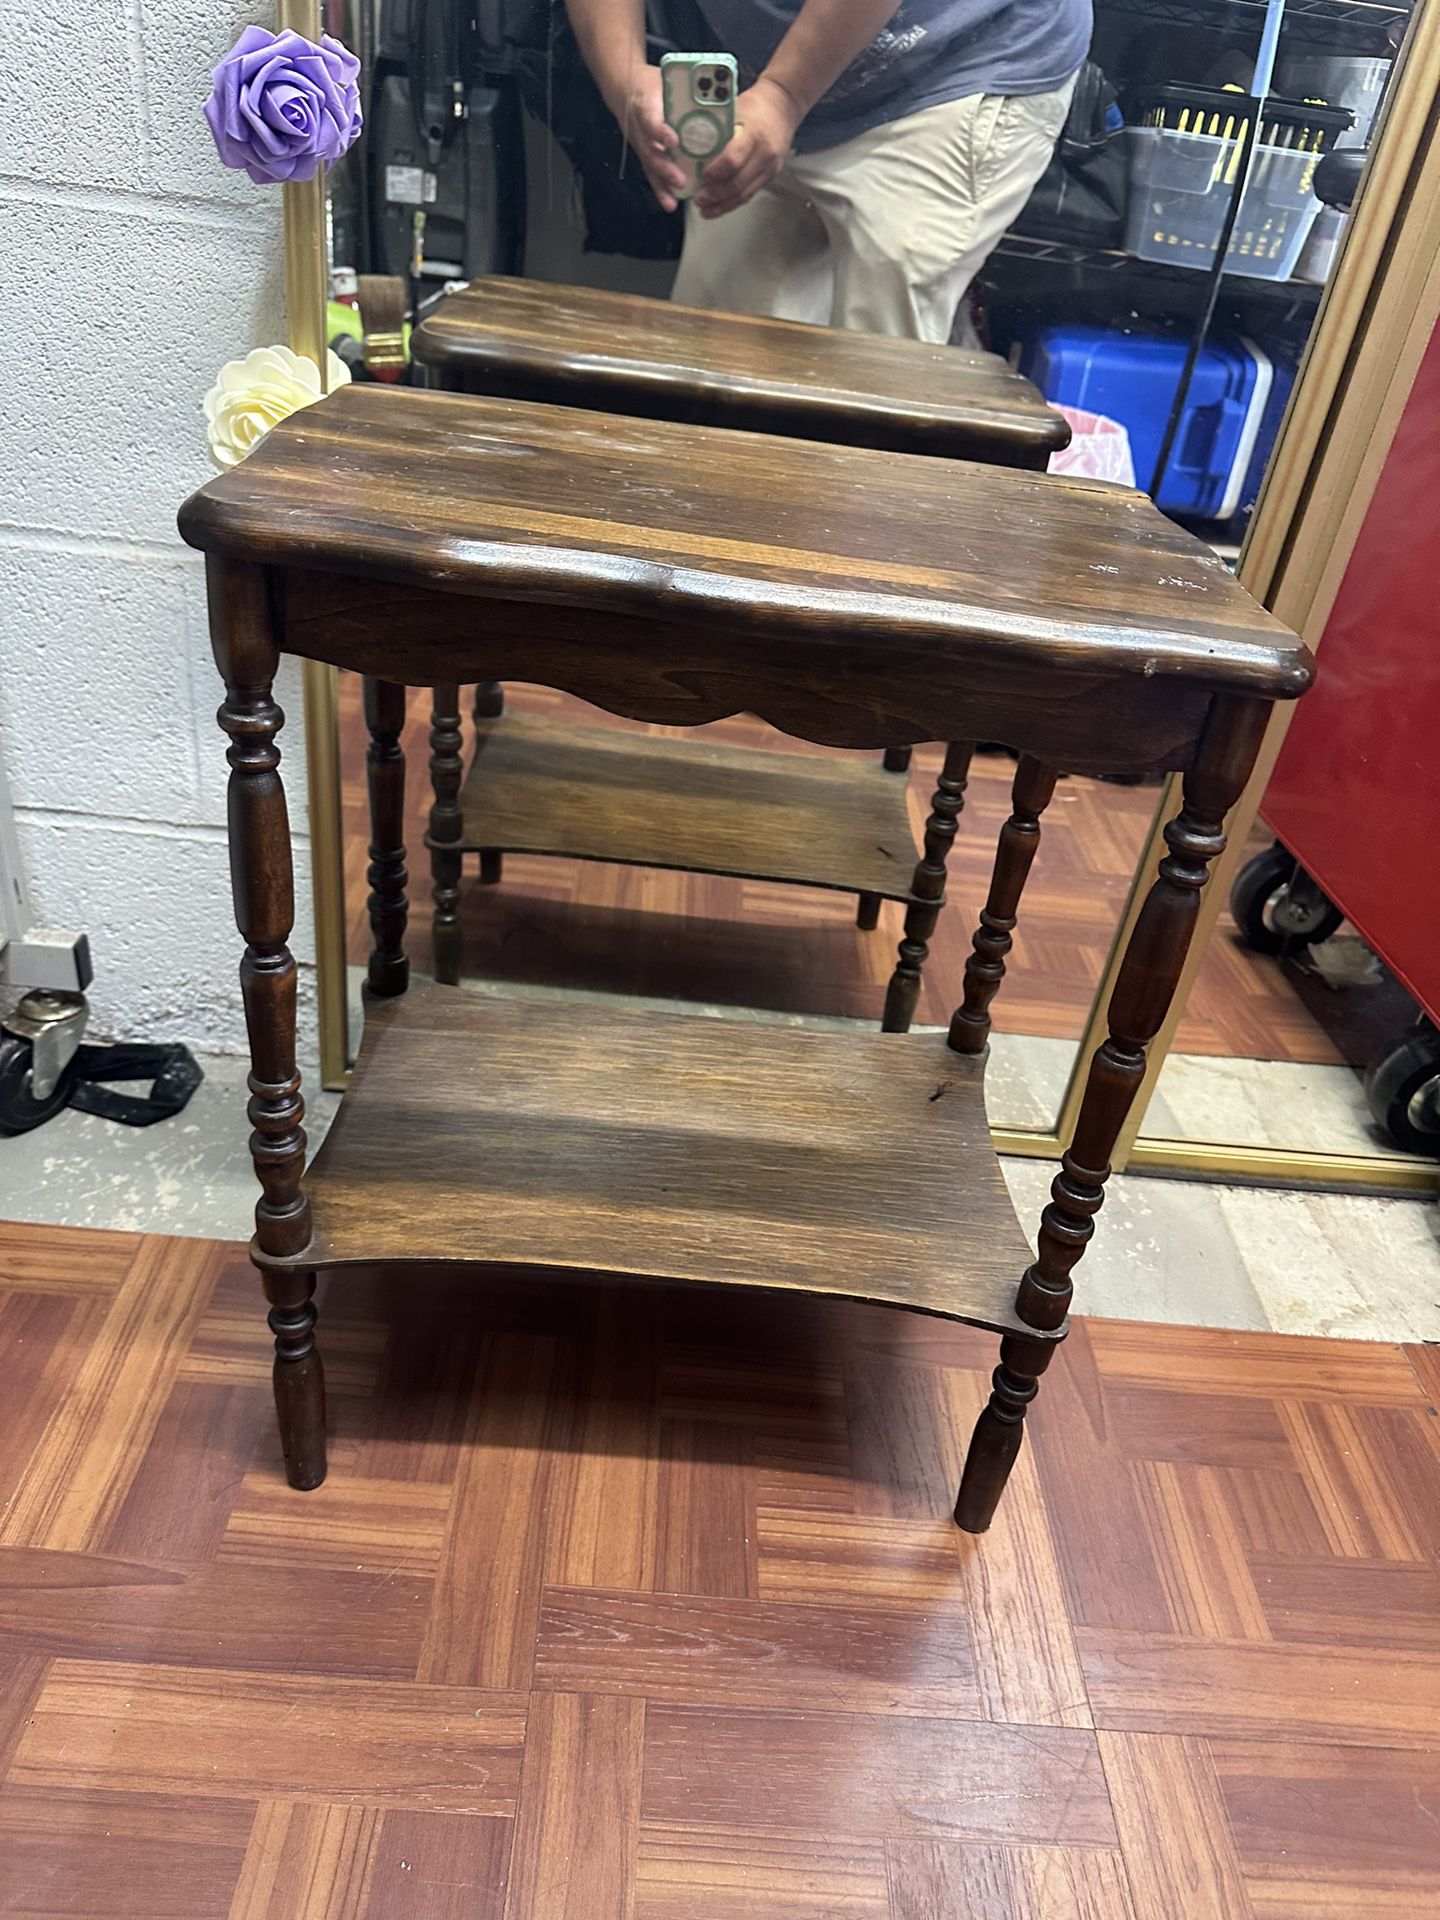 Small Side Table